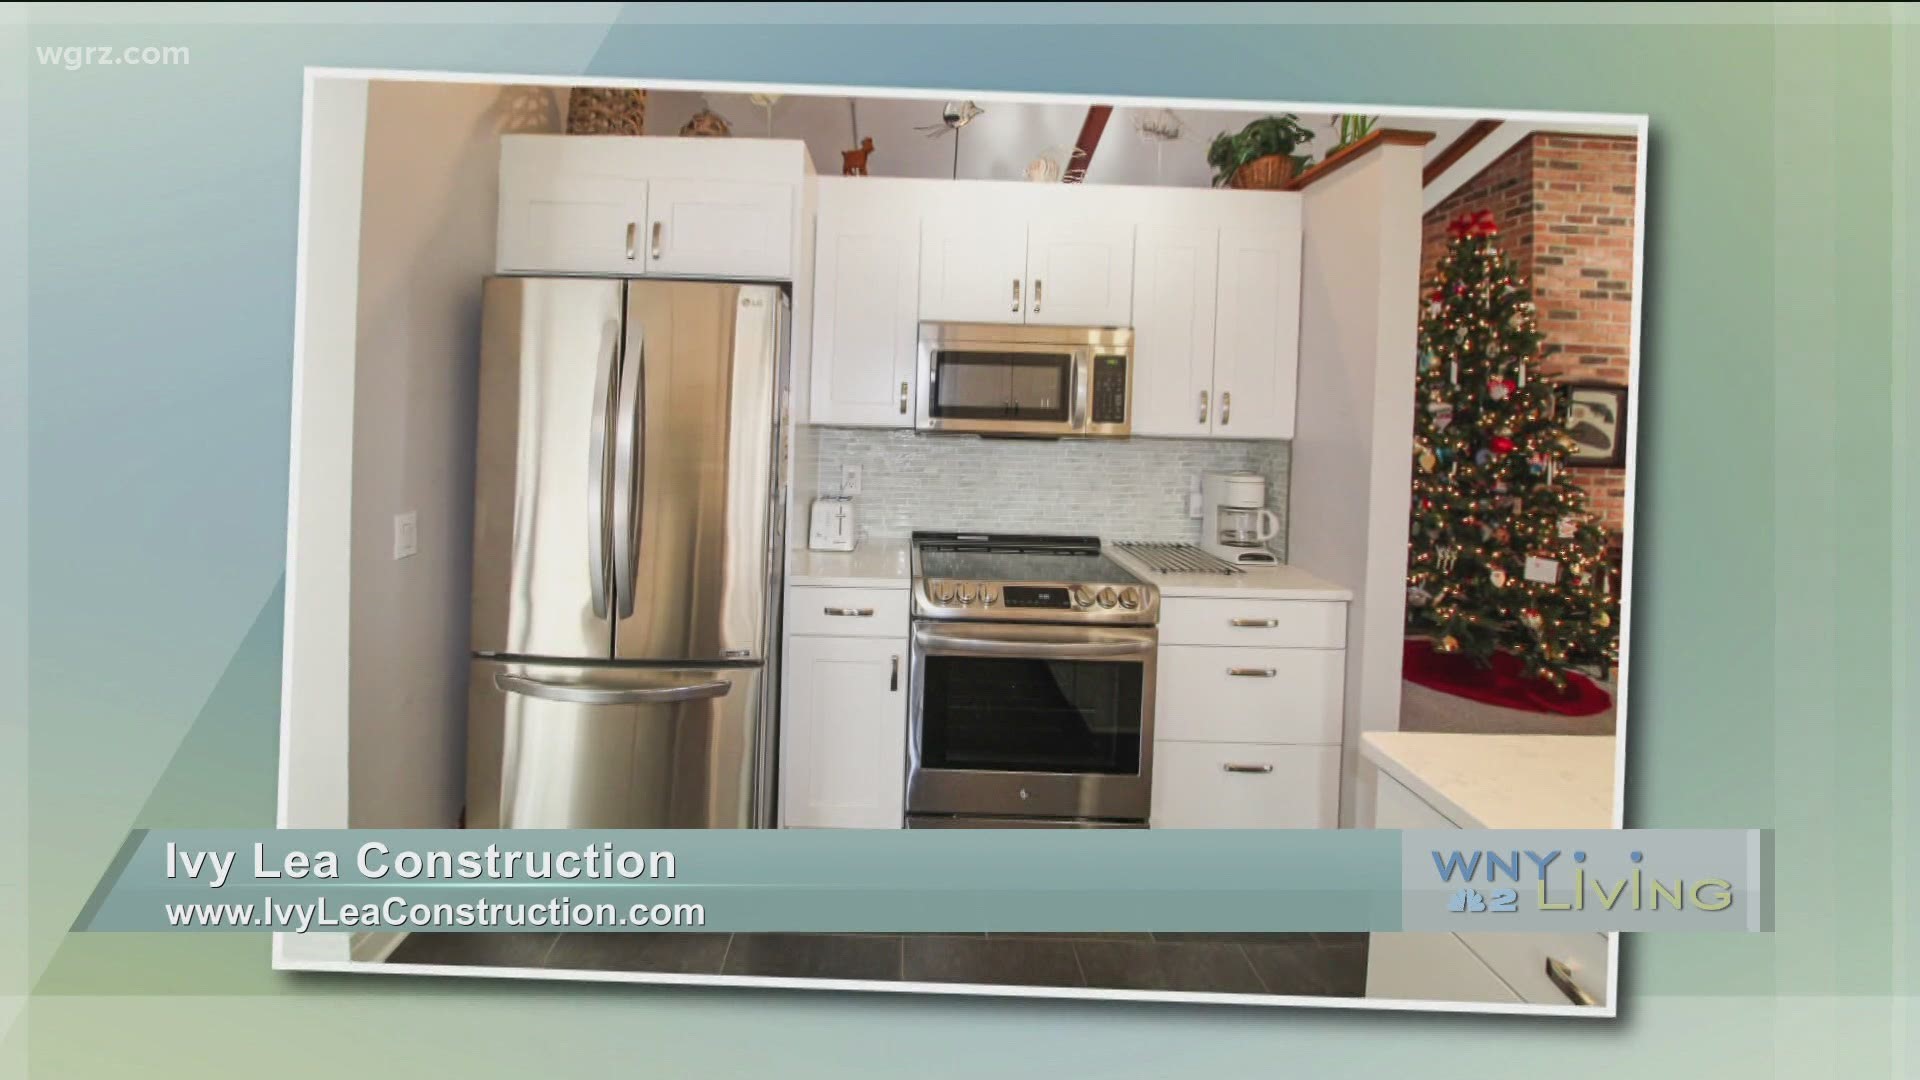 WNY Living - October 24 - Ivy Lea Construction (THIS VIDEO IS SPONSORED BY IVY LEA CONSTRUCTION)